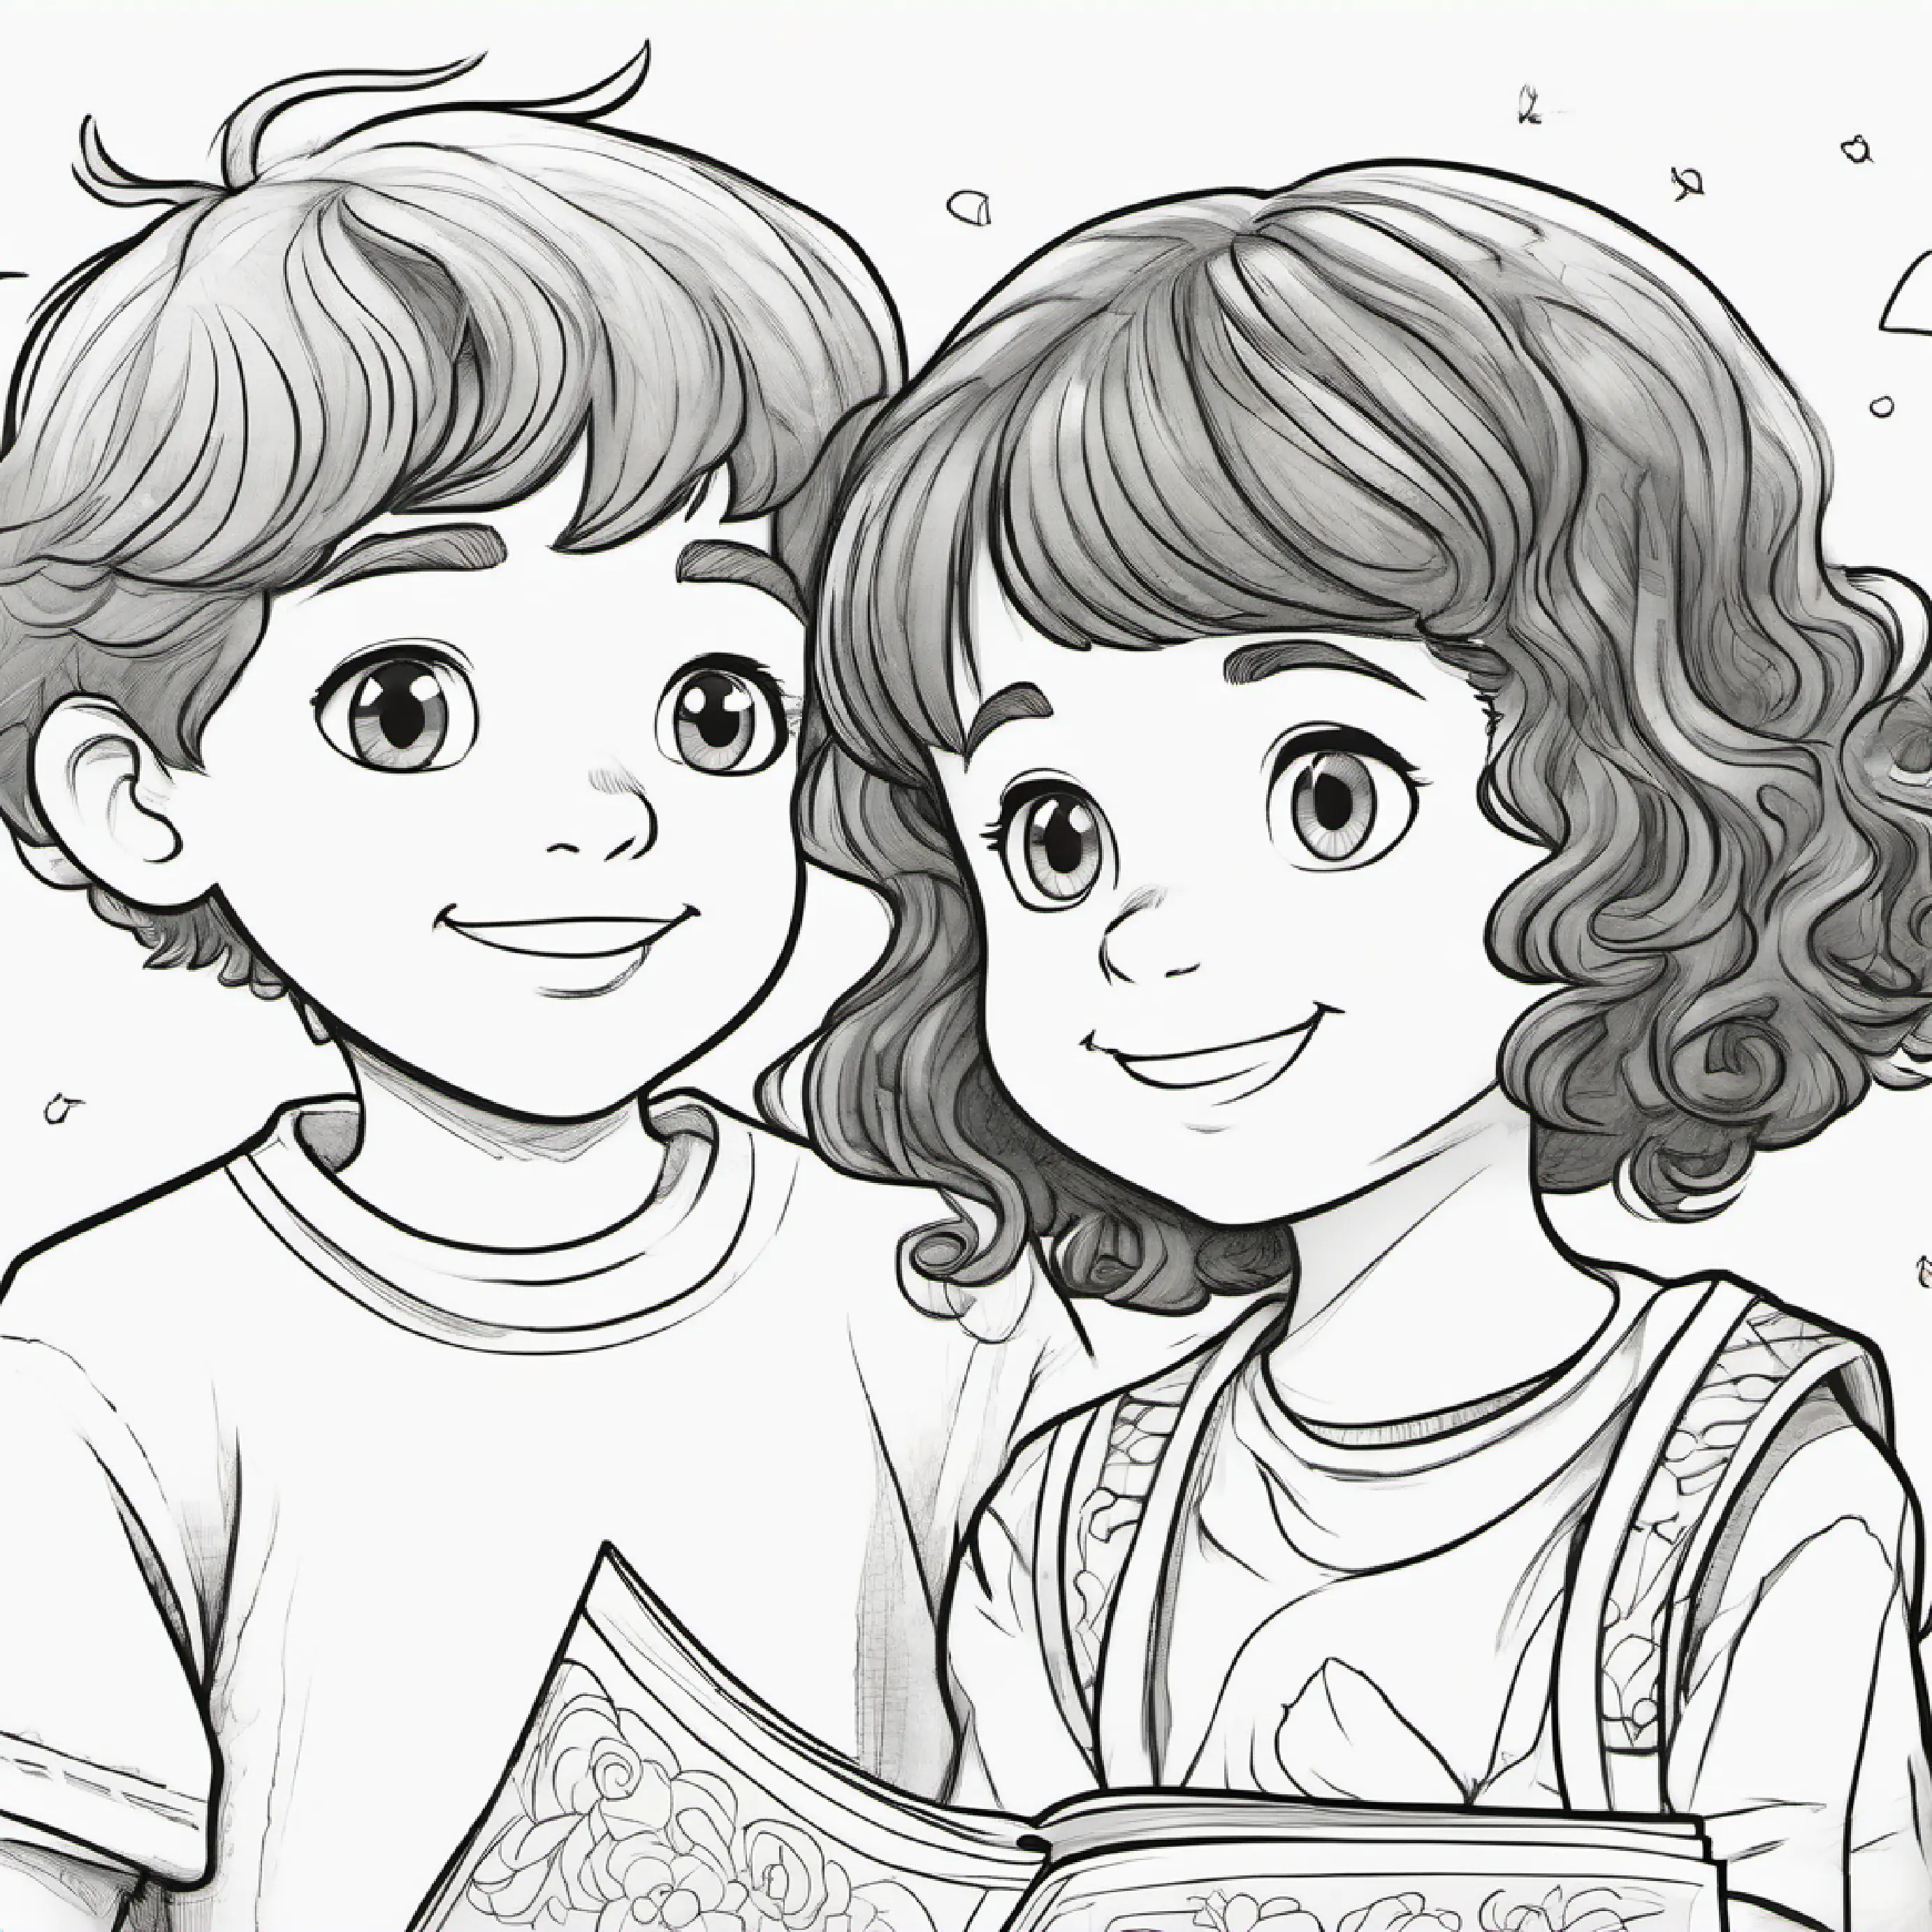 Little girl with bright green eyes and curly brown hair observes New boy with short black hair and thoughtful brown eyes's happiness, reflects on her kindness.